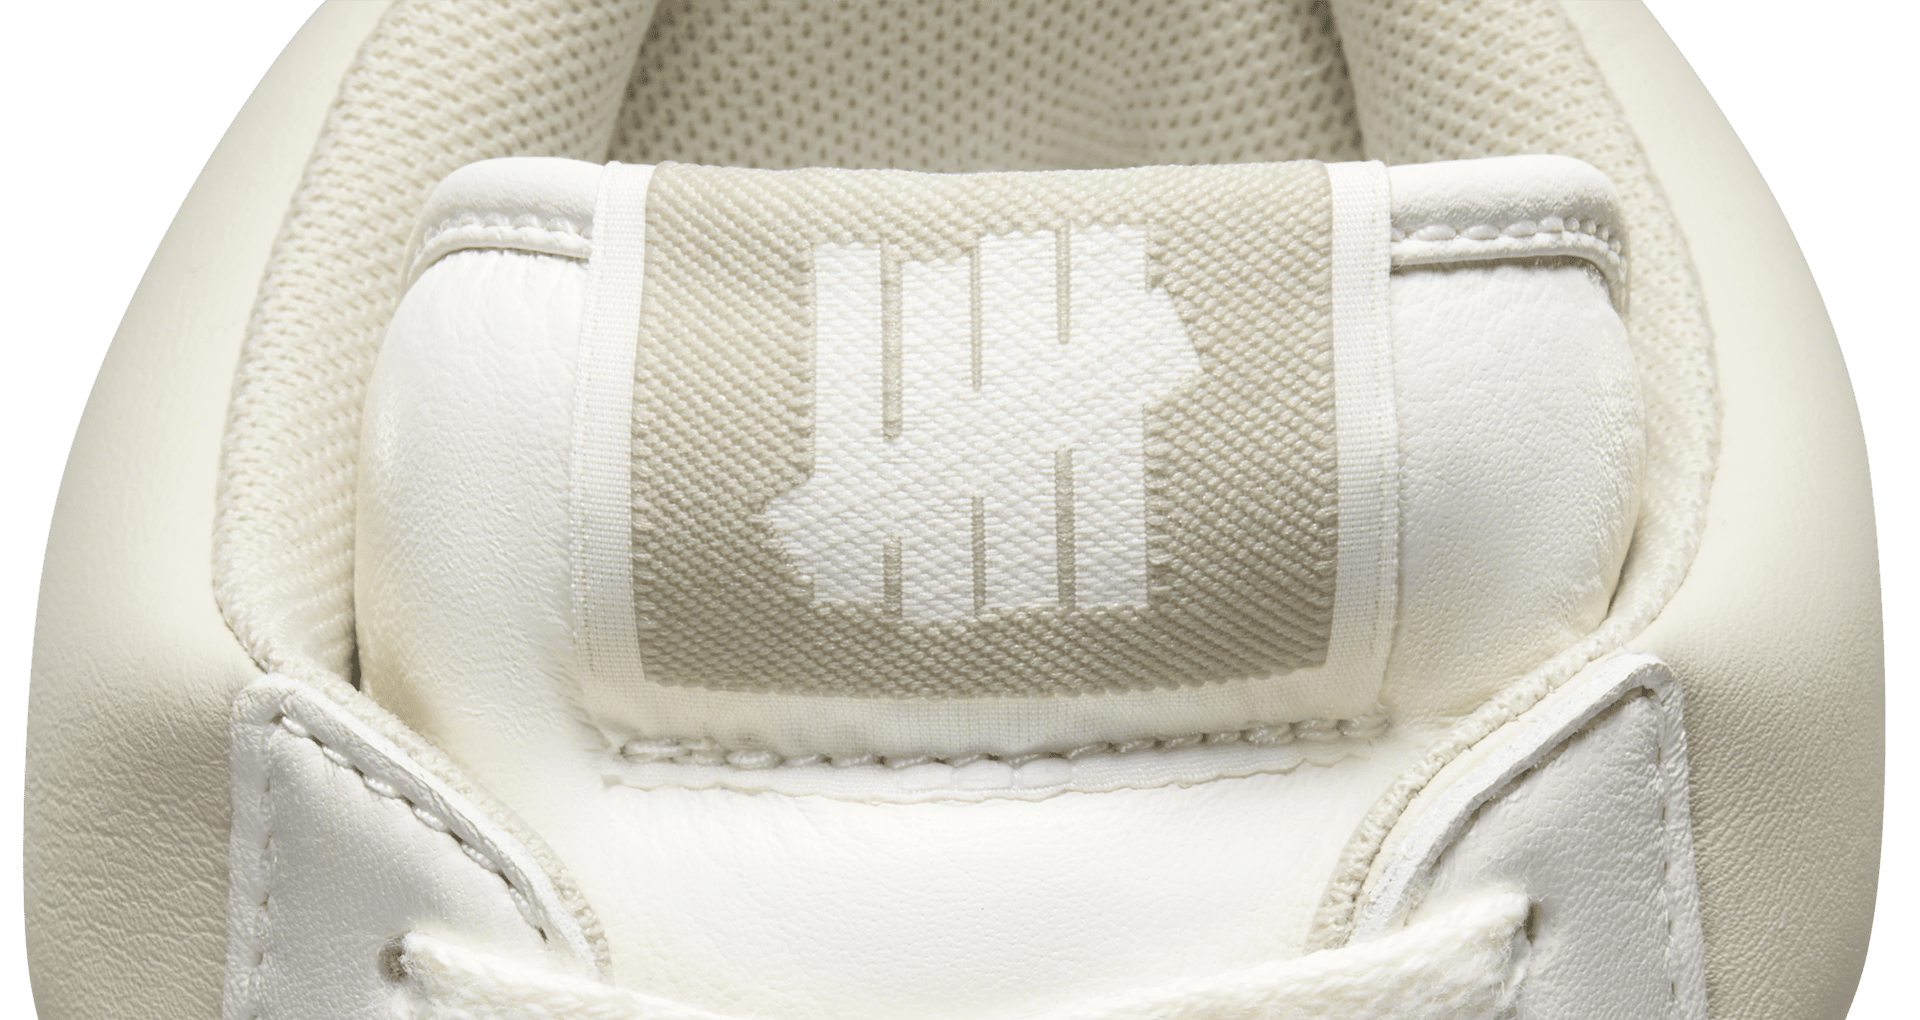 Converse x UNDEFEATED 'Weapon' (A02124C-100) Release Date . Nike SNKRS